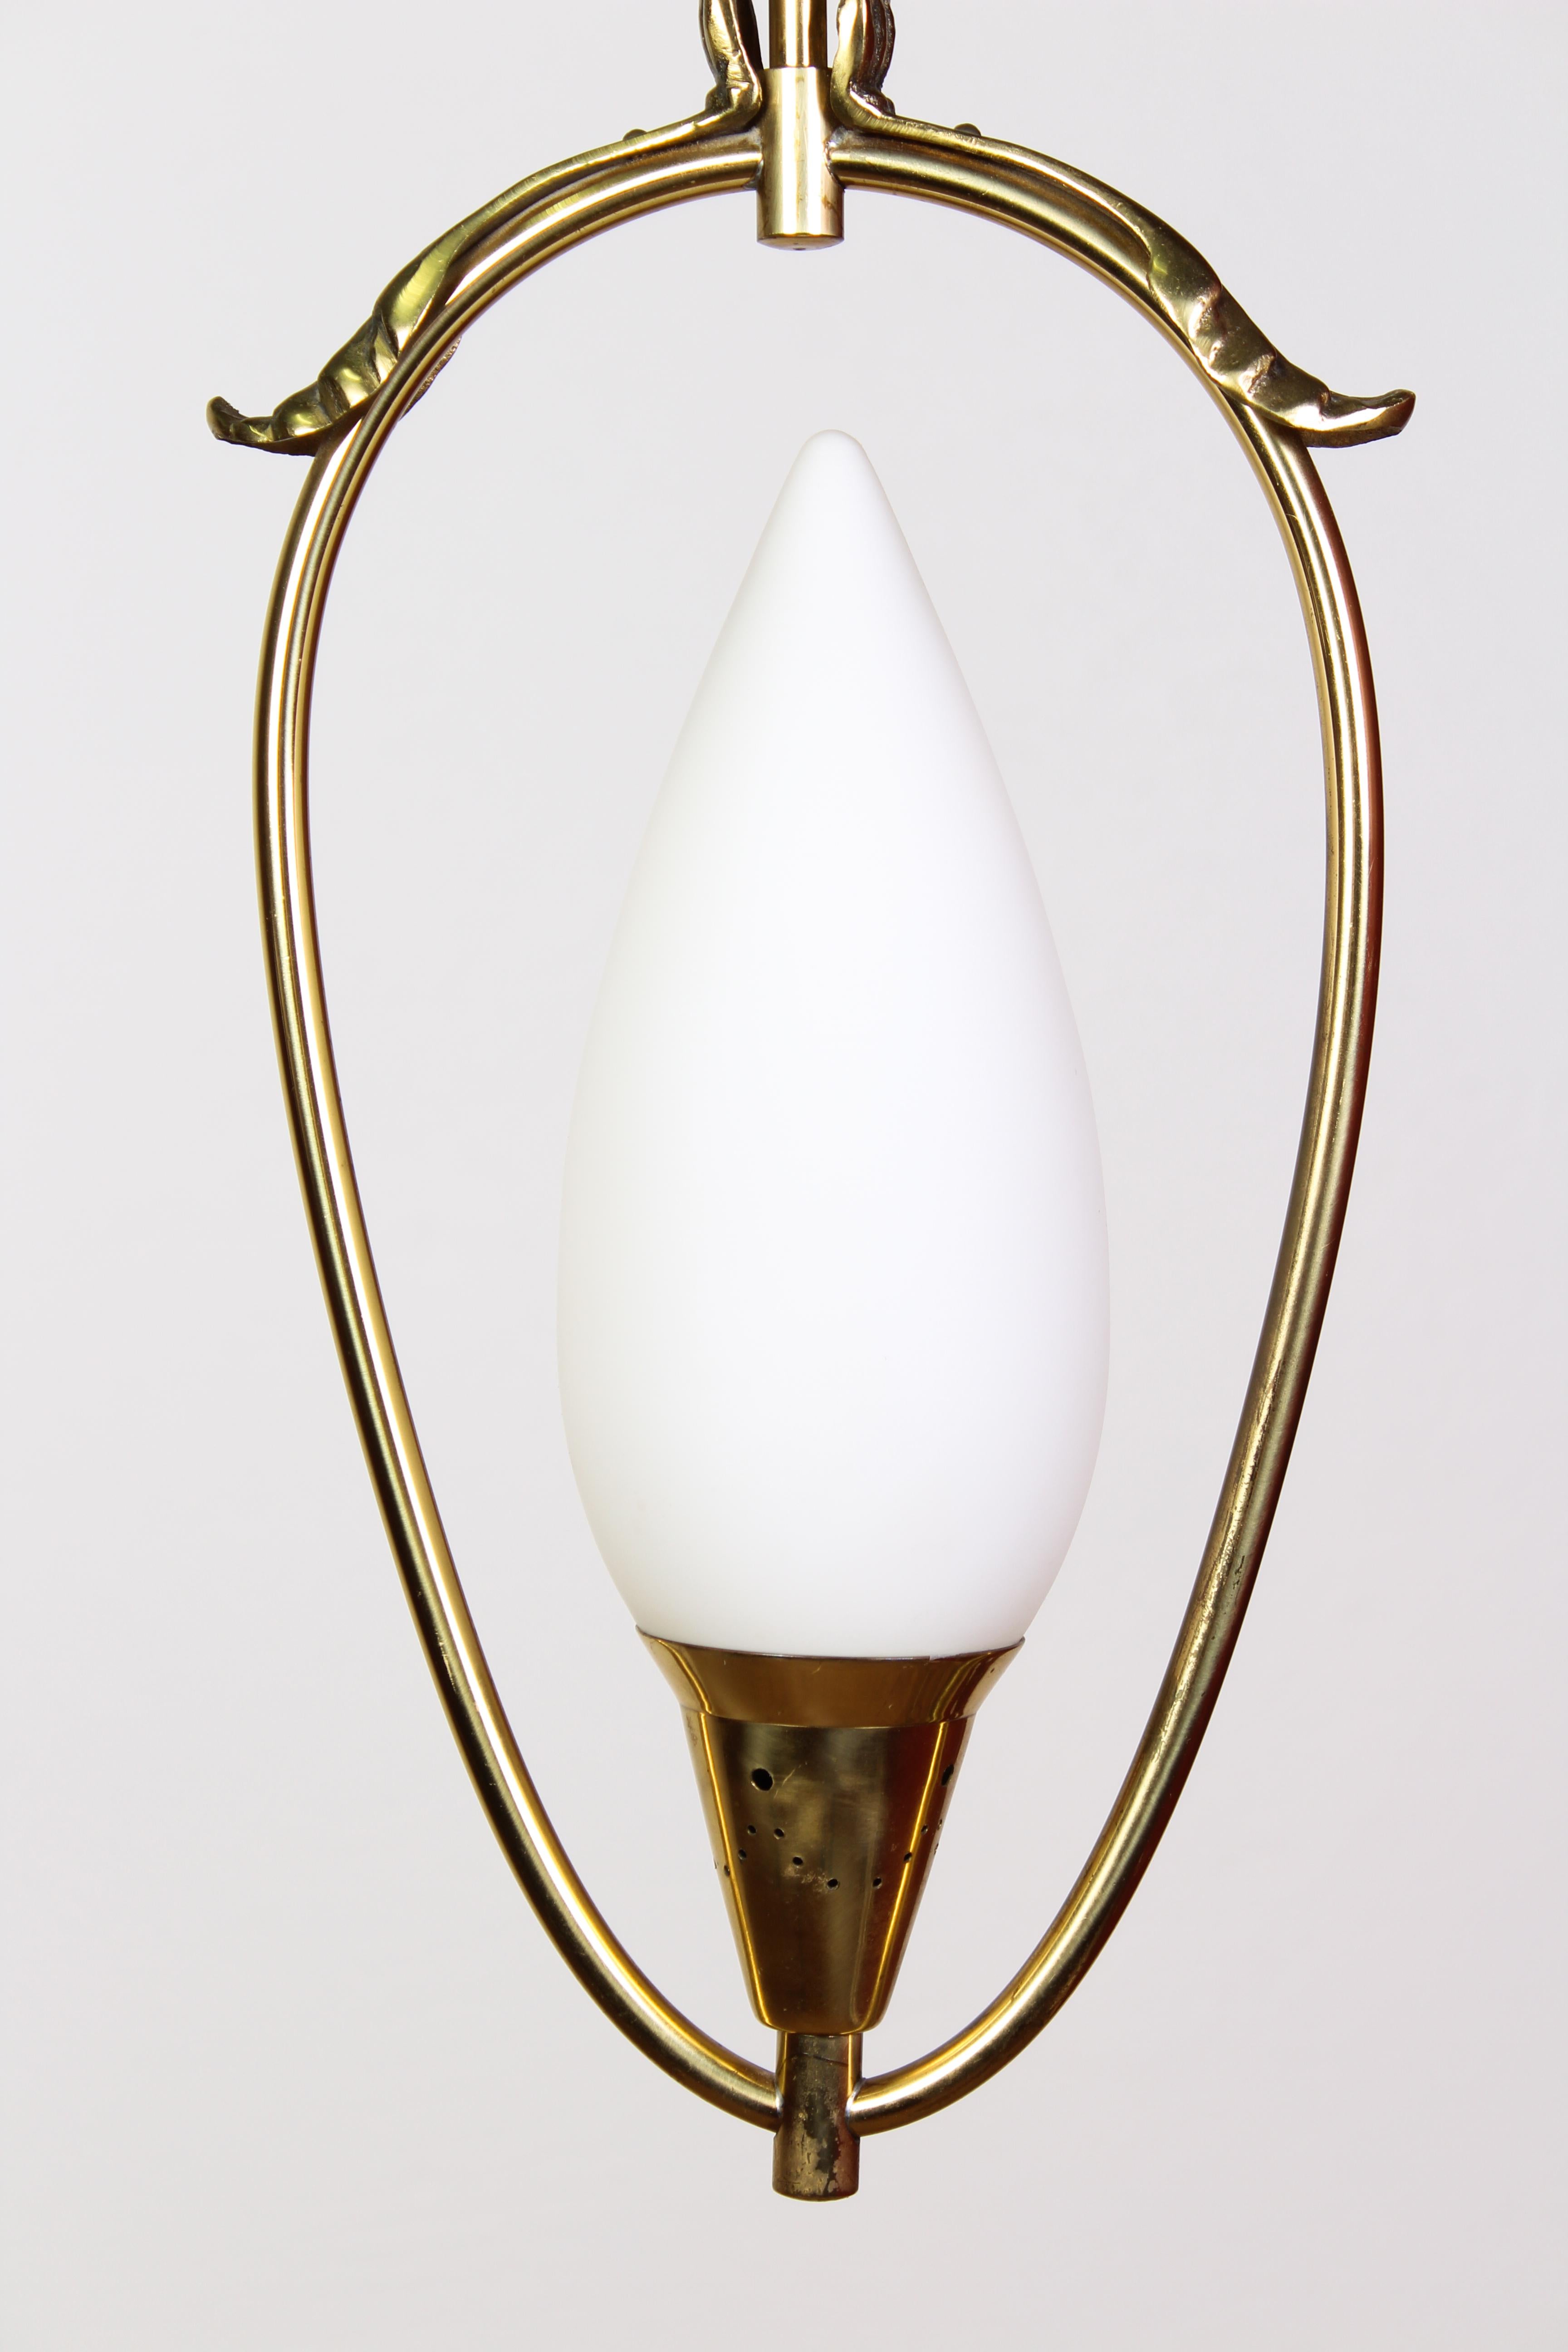 Swedish Brass and Opaline Glass Ceiling Lamp, 1940s For Sale 2